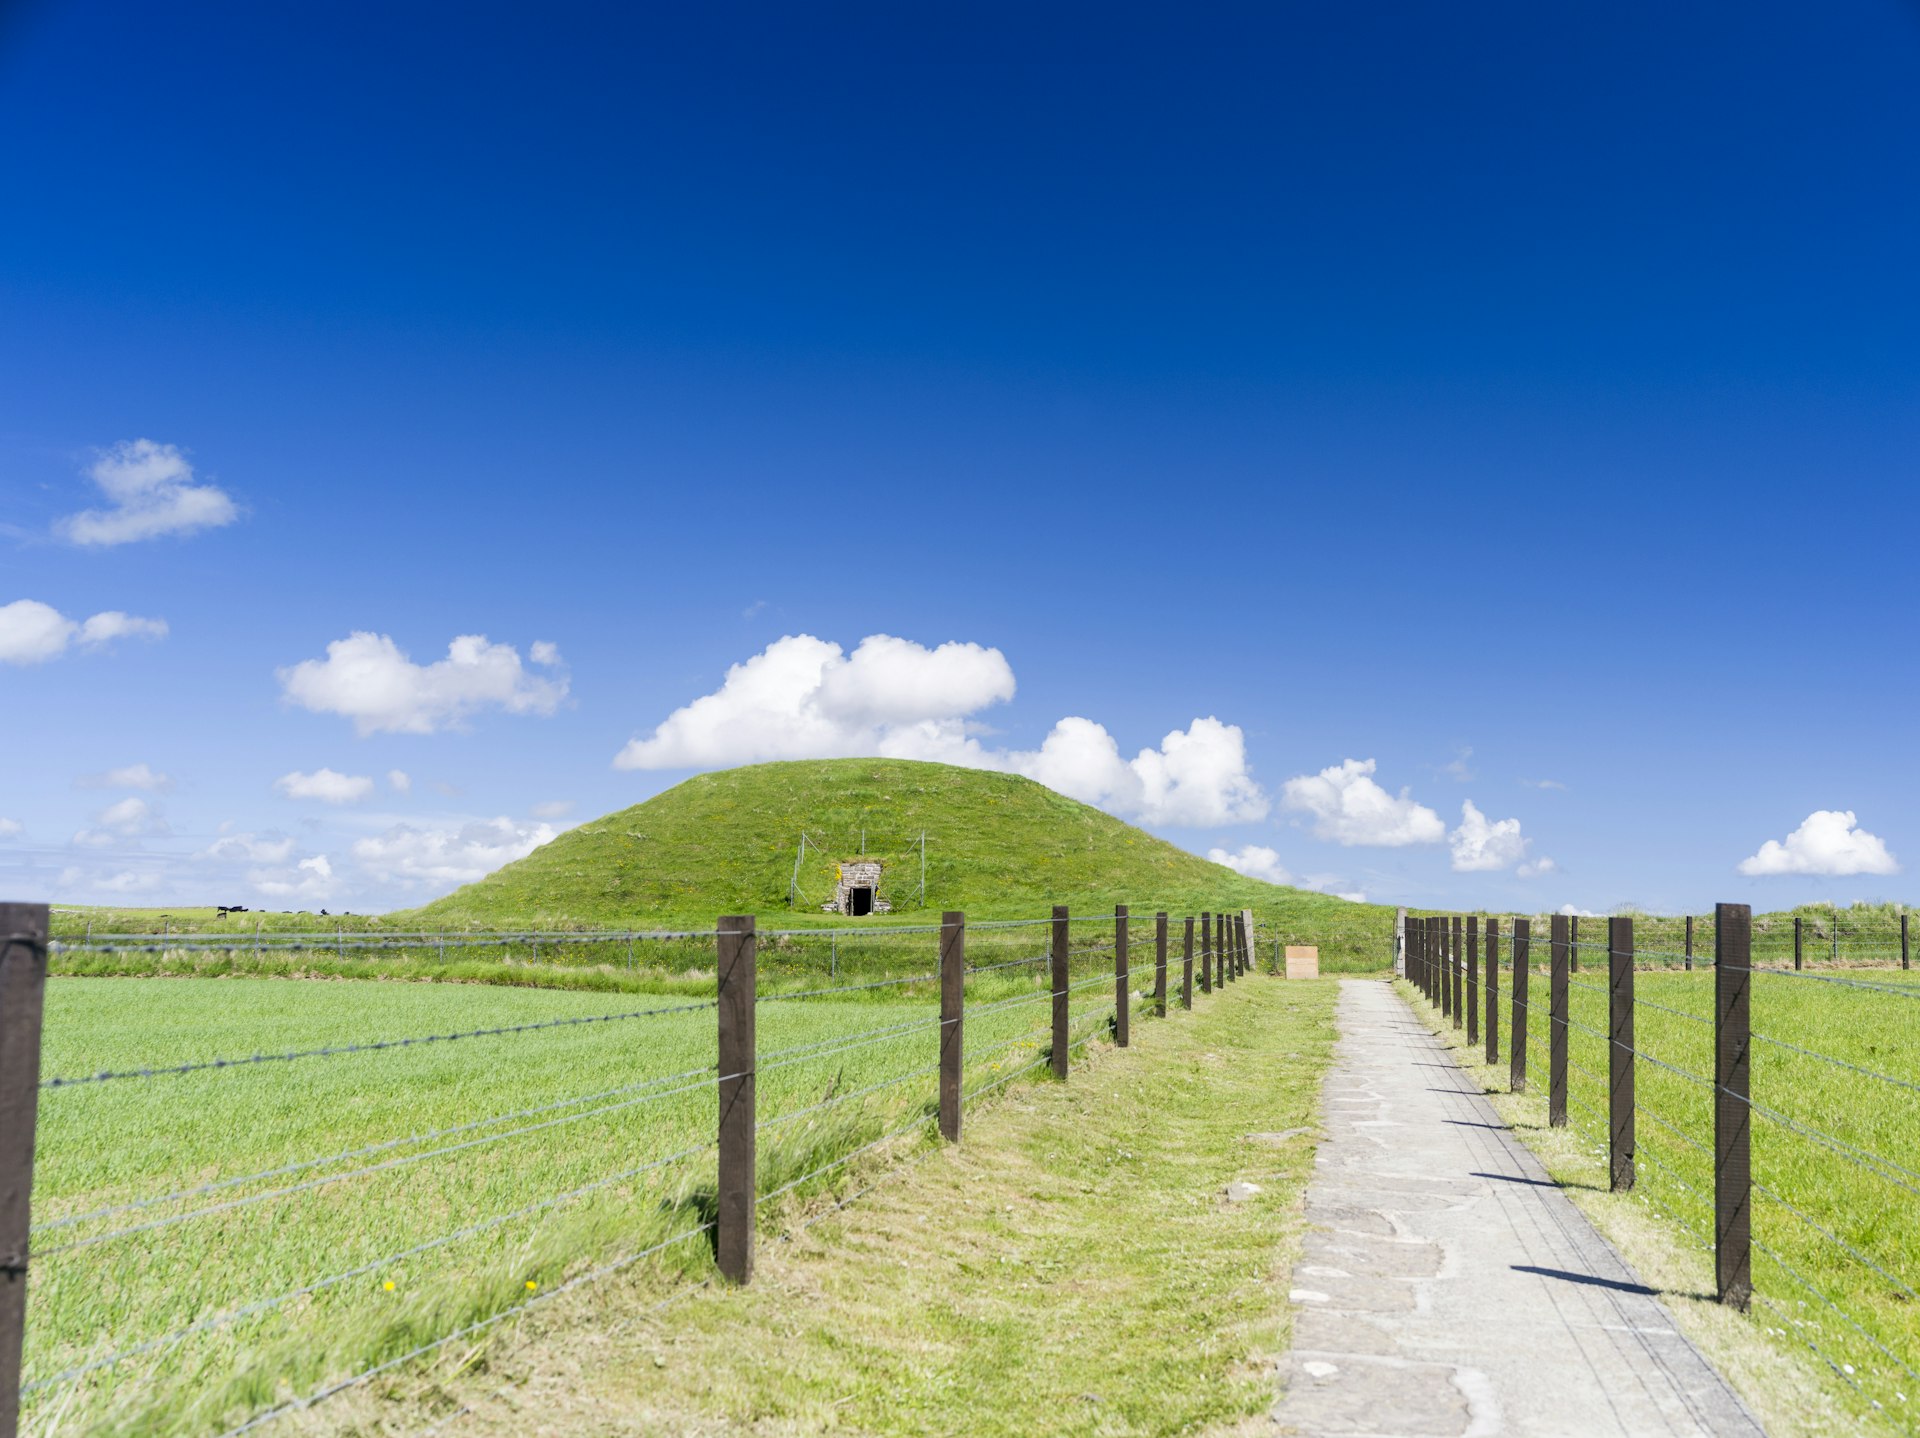 The chambered cairn of Maeshowe, Orkney © Danita Delimont / Getty Images